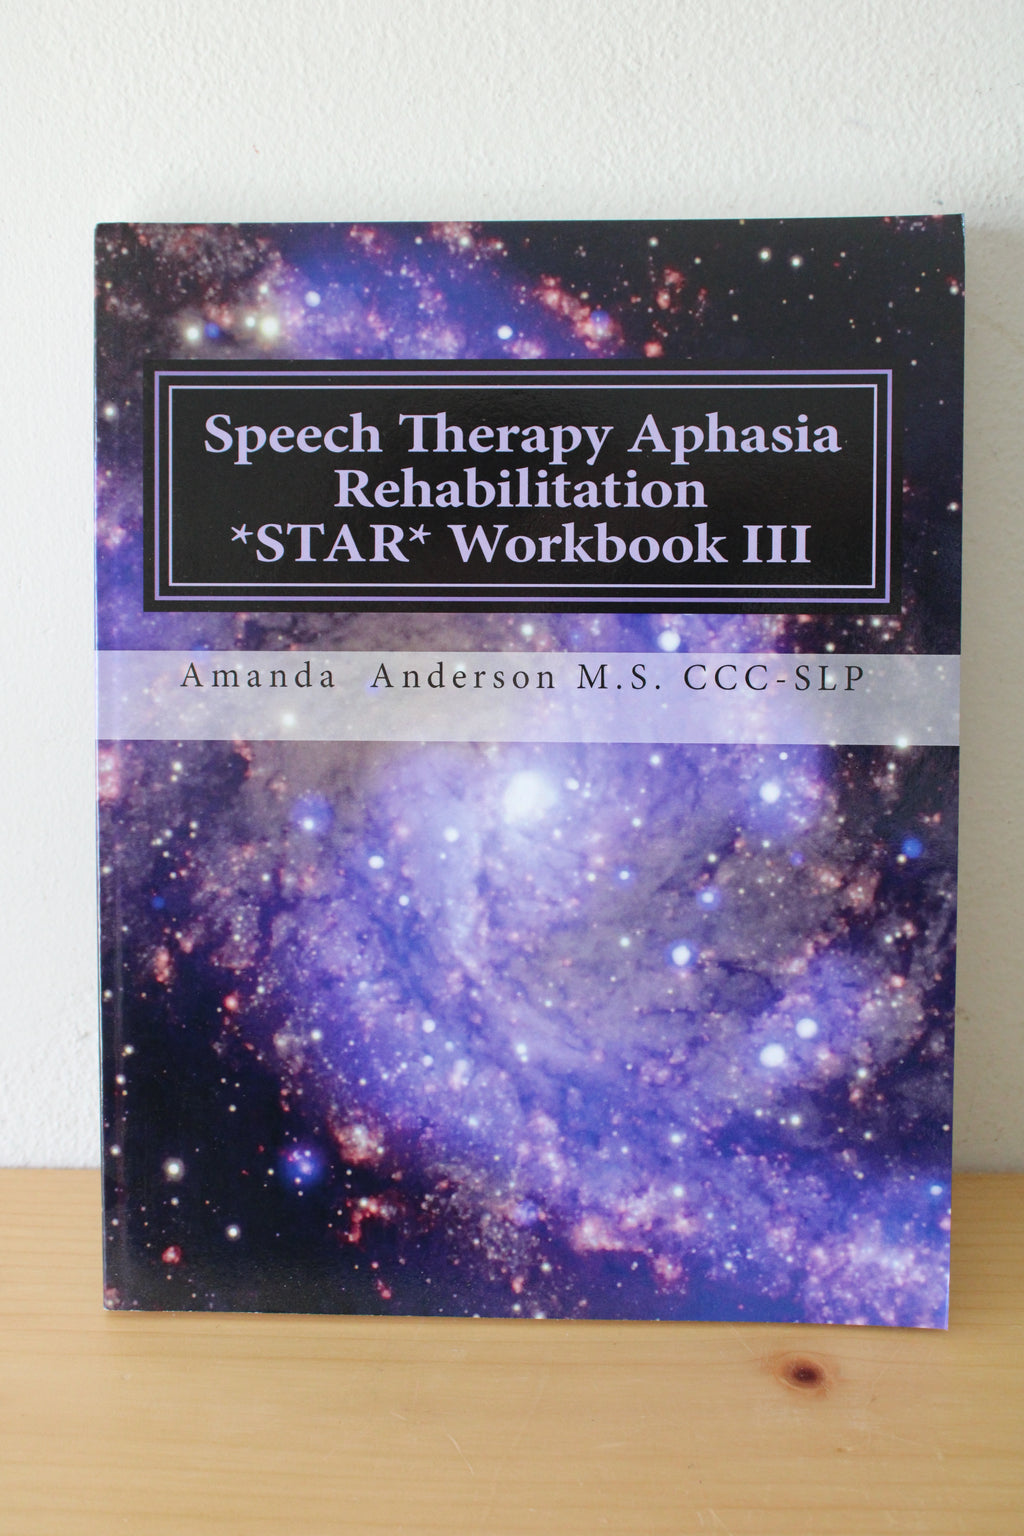 Speech Therapy Aphasia Rehabilitation STAR Workbook III By Amanda Anderson M.S. CCC-SLP